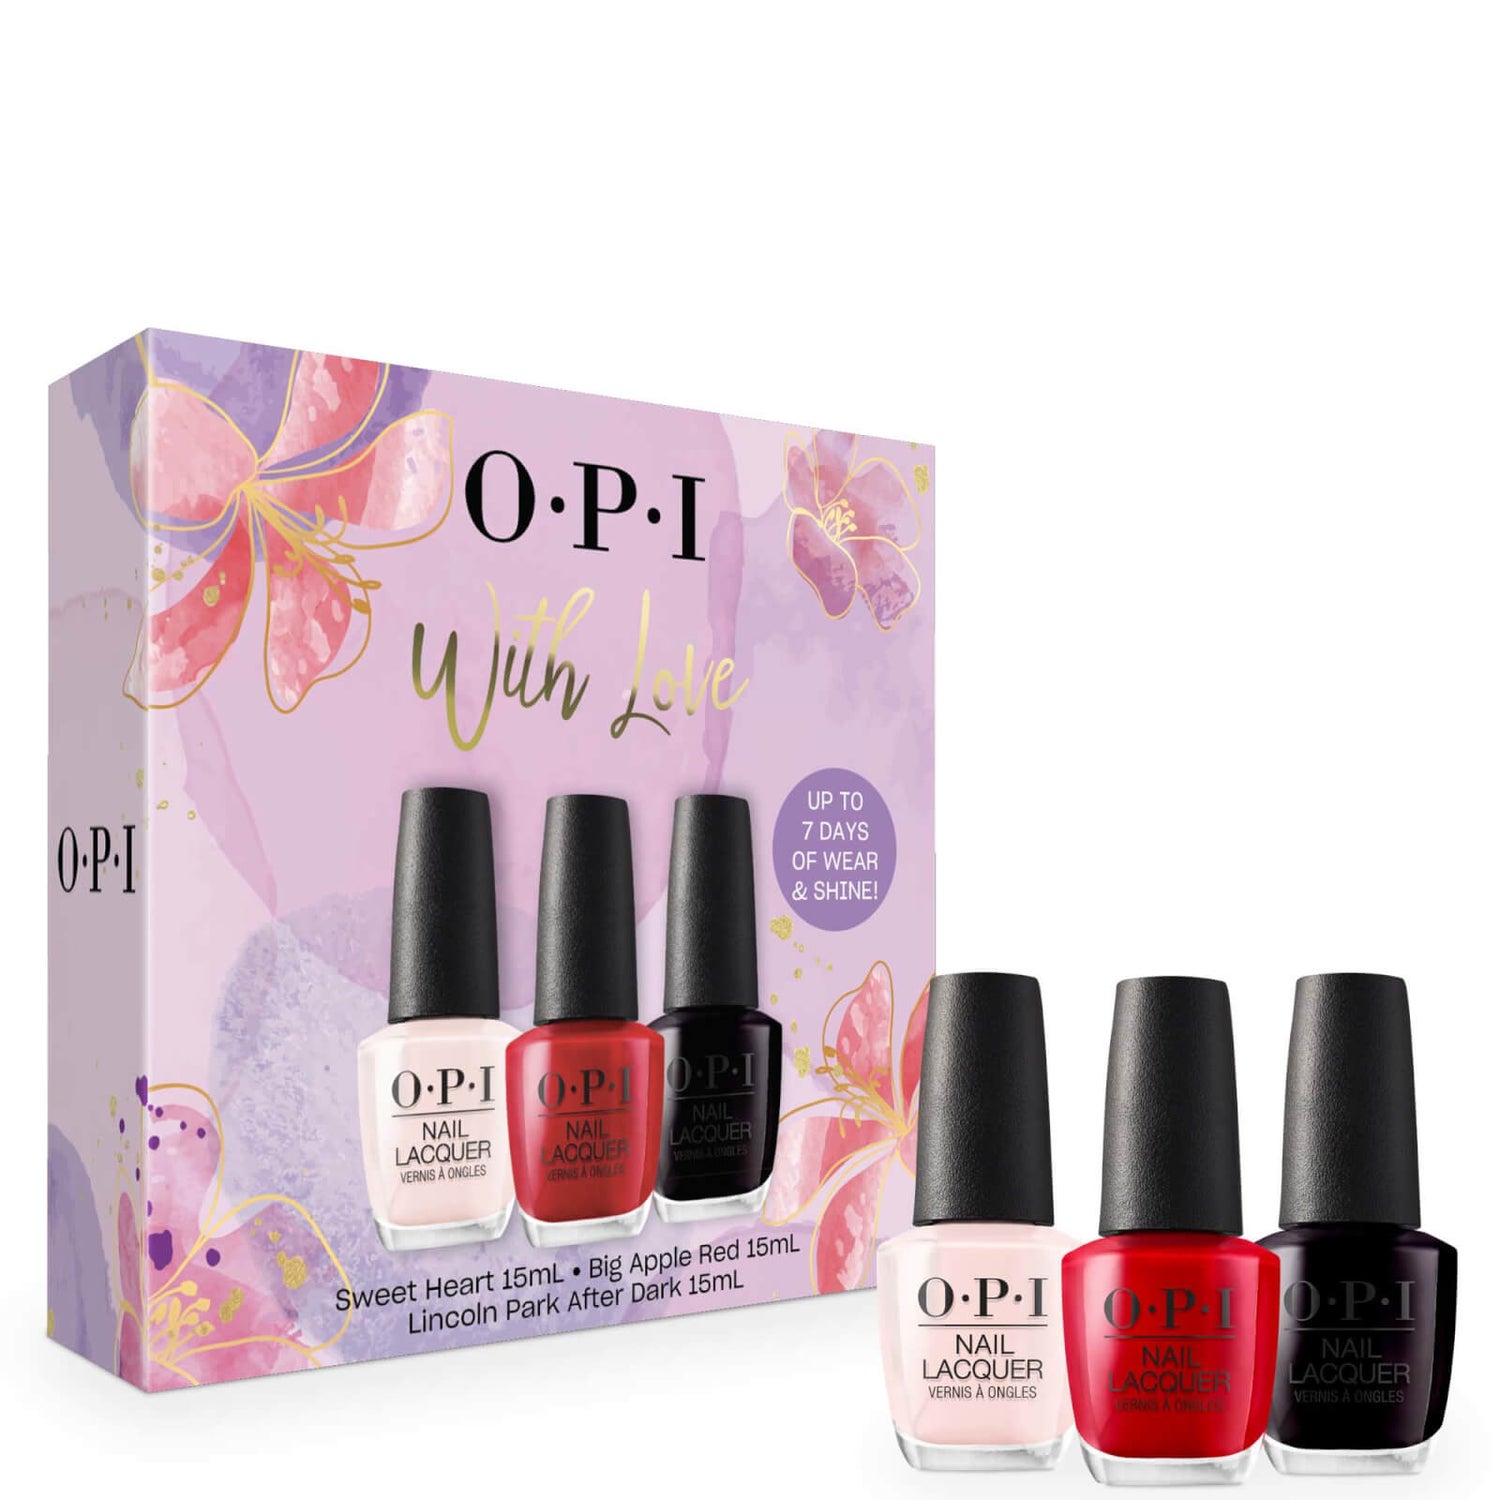 OPI Nail Lacquer Trio Gift Set - Sweet Heart, Big Apple Red, Lincoln Park After Dark